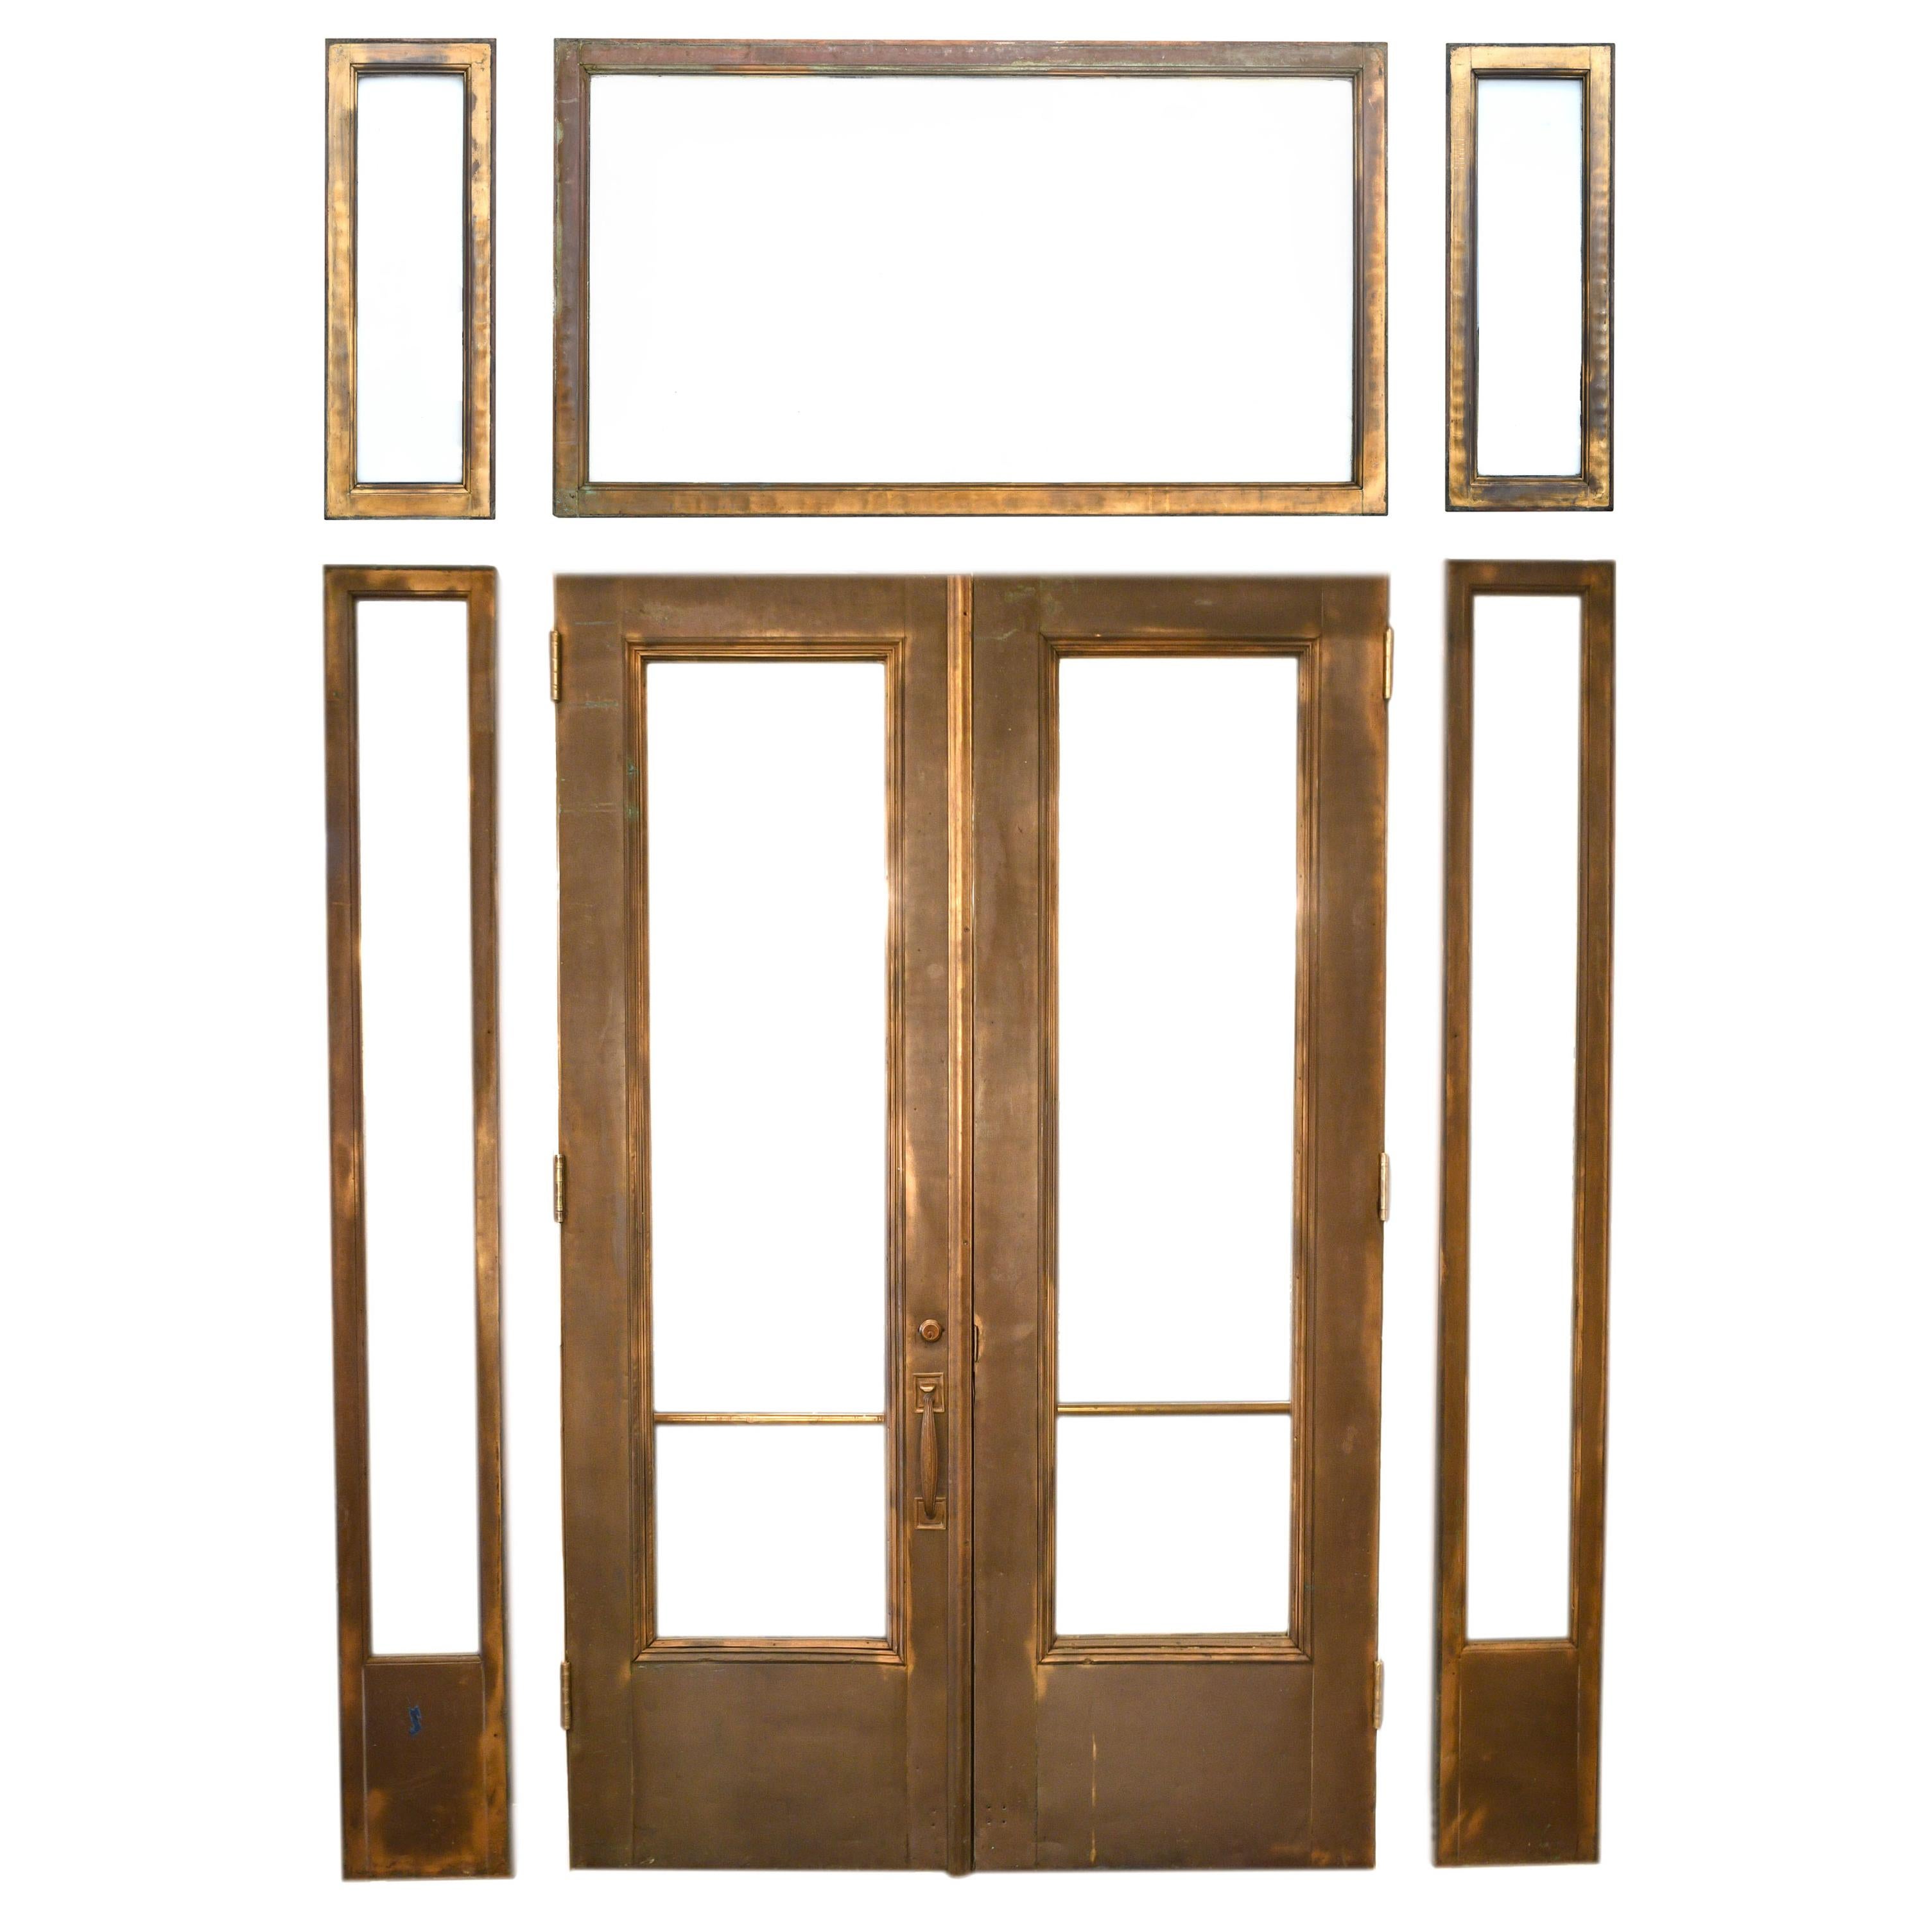 Brass Clad Entry/Double Doors with Sidelights & Transoms For Sale